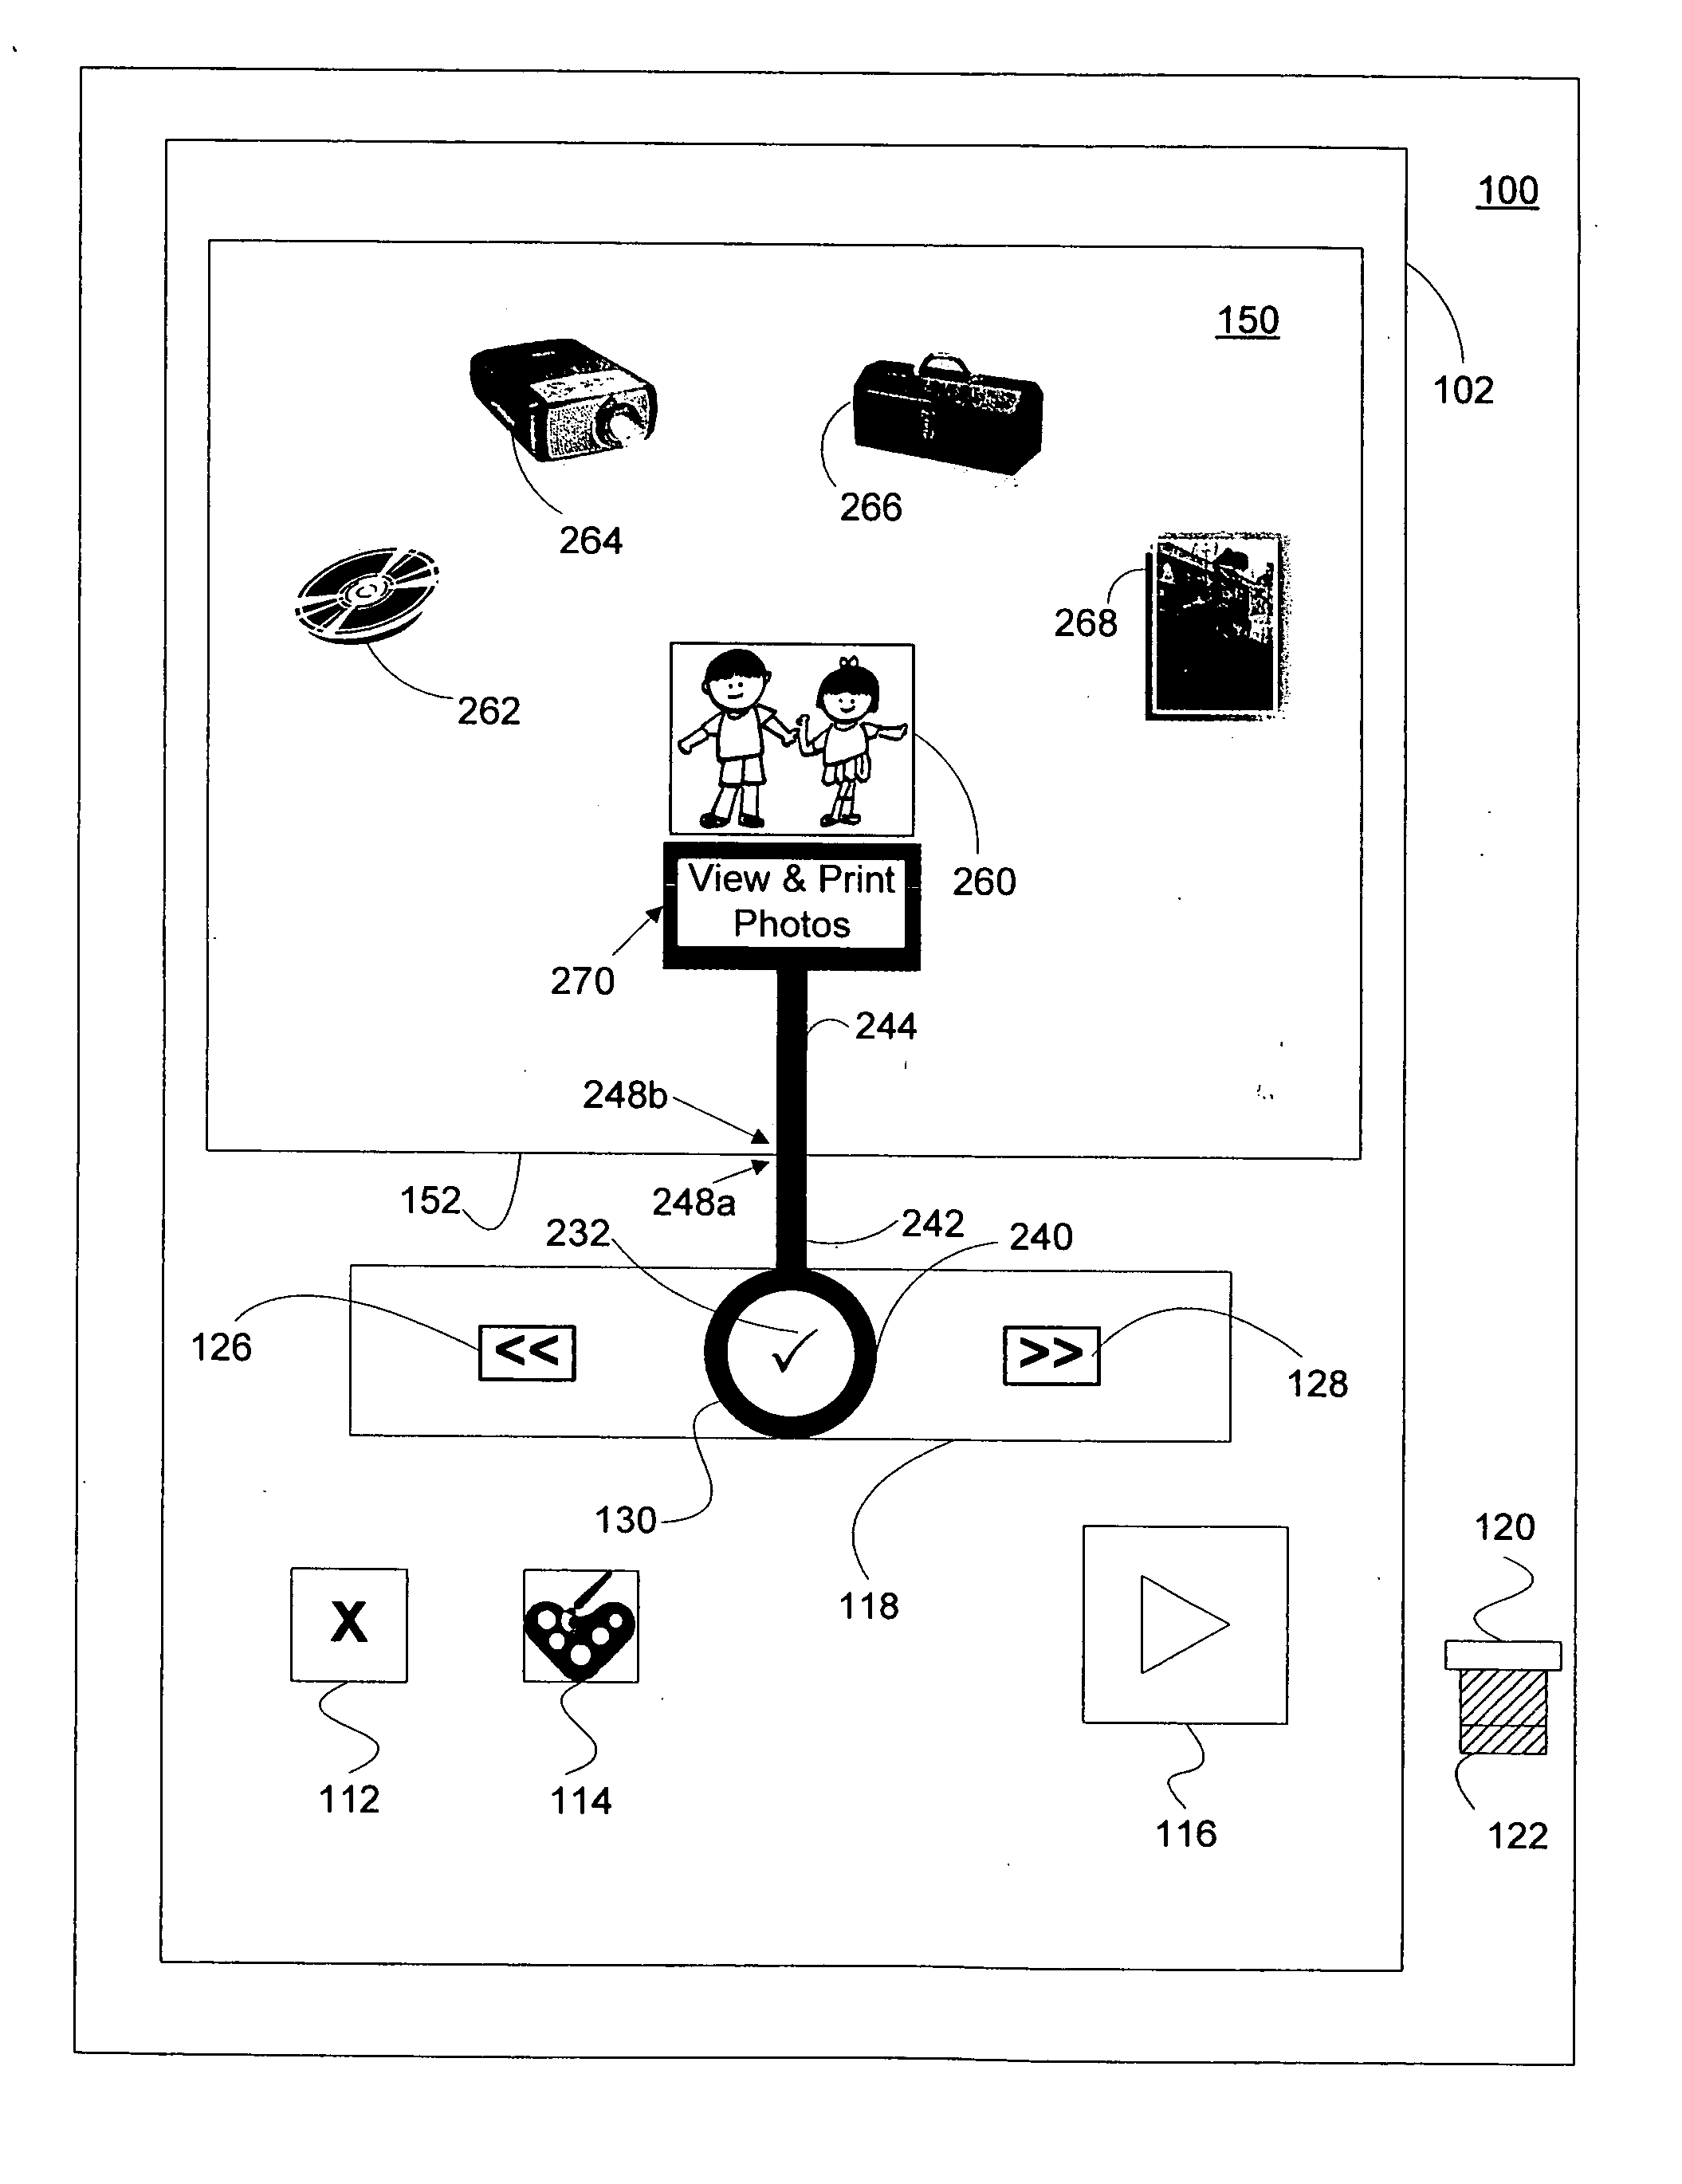 Control panel using ray-of-light to enhance control-display relationships